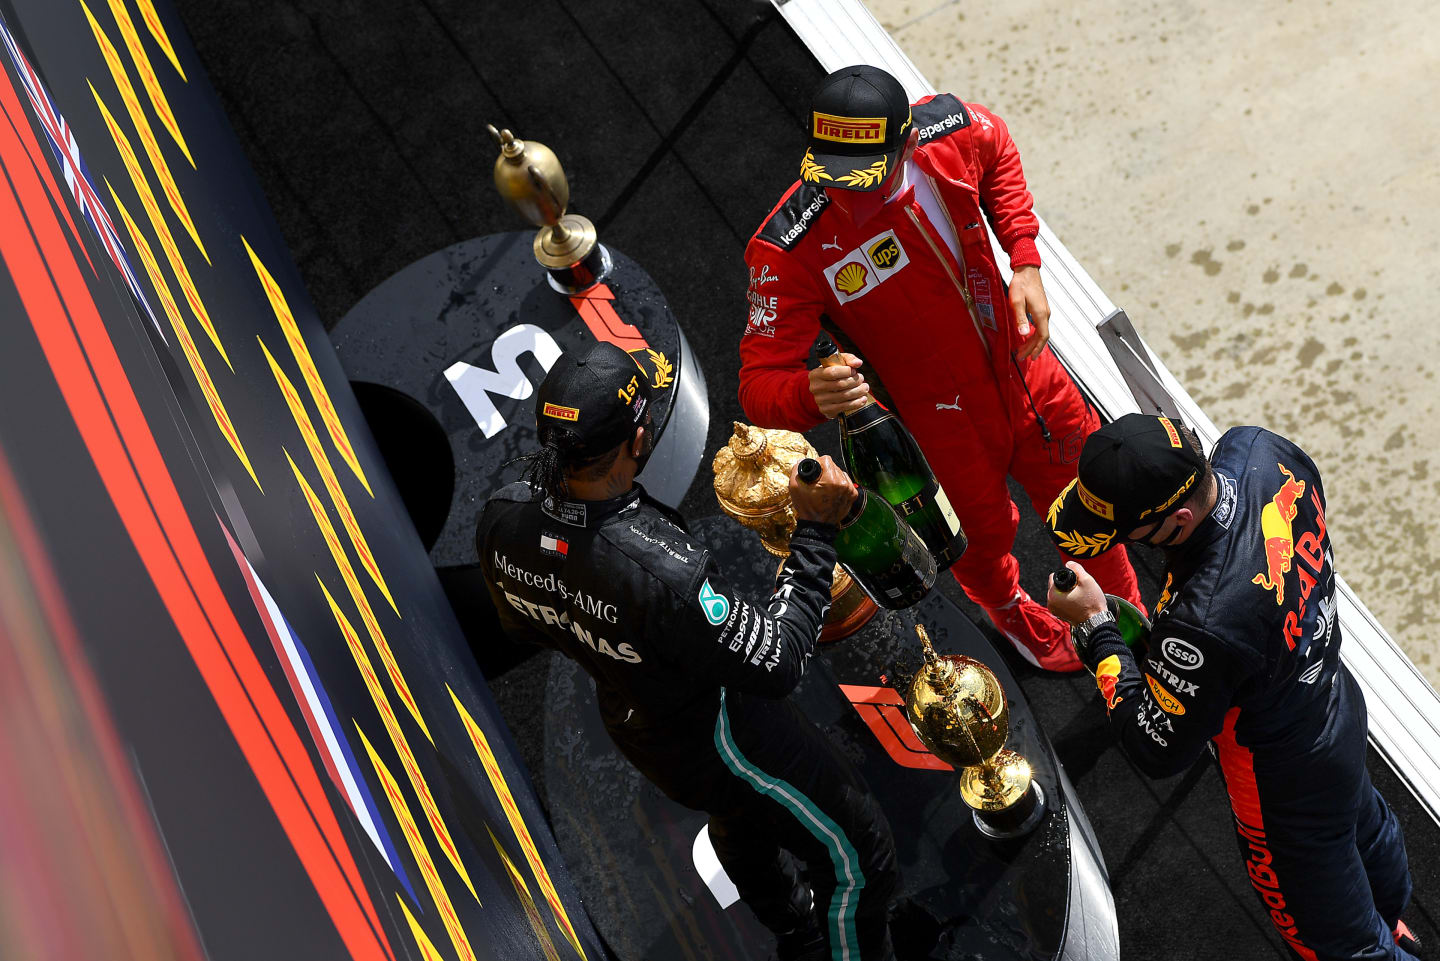 NORTHAMPTON, ENGLAND - AUGUST 02: Race winner Lewis Hamilton of Great Britain and Mercedes GP, second placed Max Verstappen of Netherlands and Red Bull Racing and third placed Charles Leclerc of Monaco and Ferrari celebrate on the podium during the F1 Grand Prix of Great Britain at Silverstone on August 02, 2020 in Northampton, England. (Photo by Clive Mason - Formula 1/Formula 1 via Getty Images)